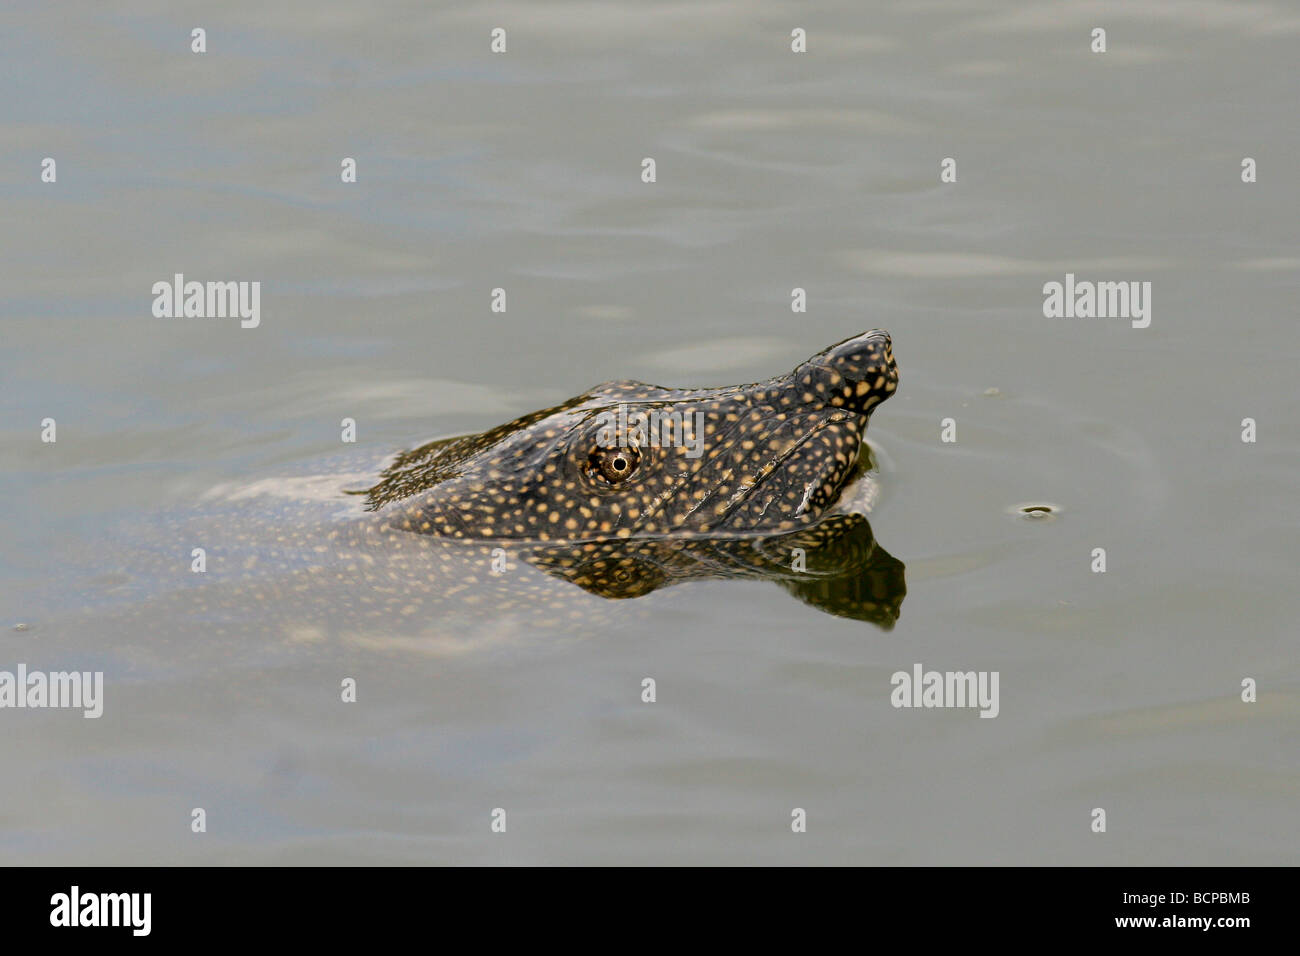 Striped neck terrapin Mauremys caspica submerged in water Stock Photo